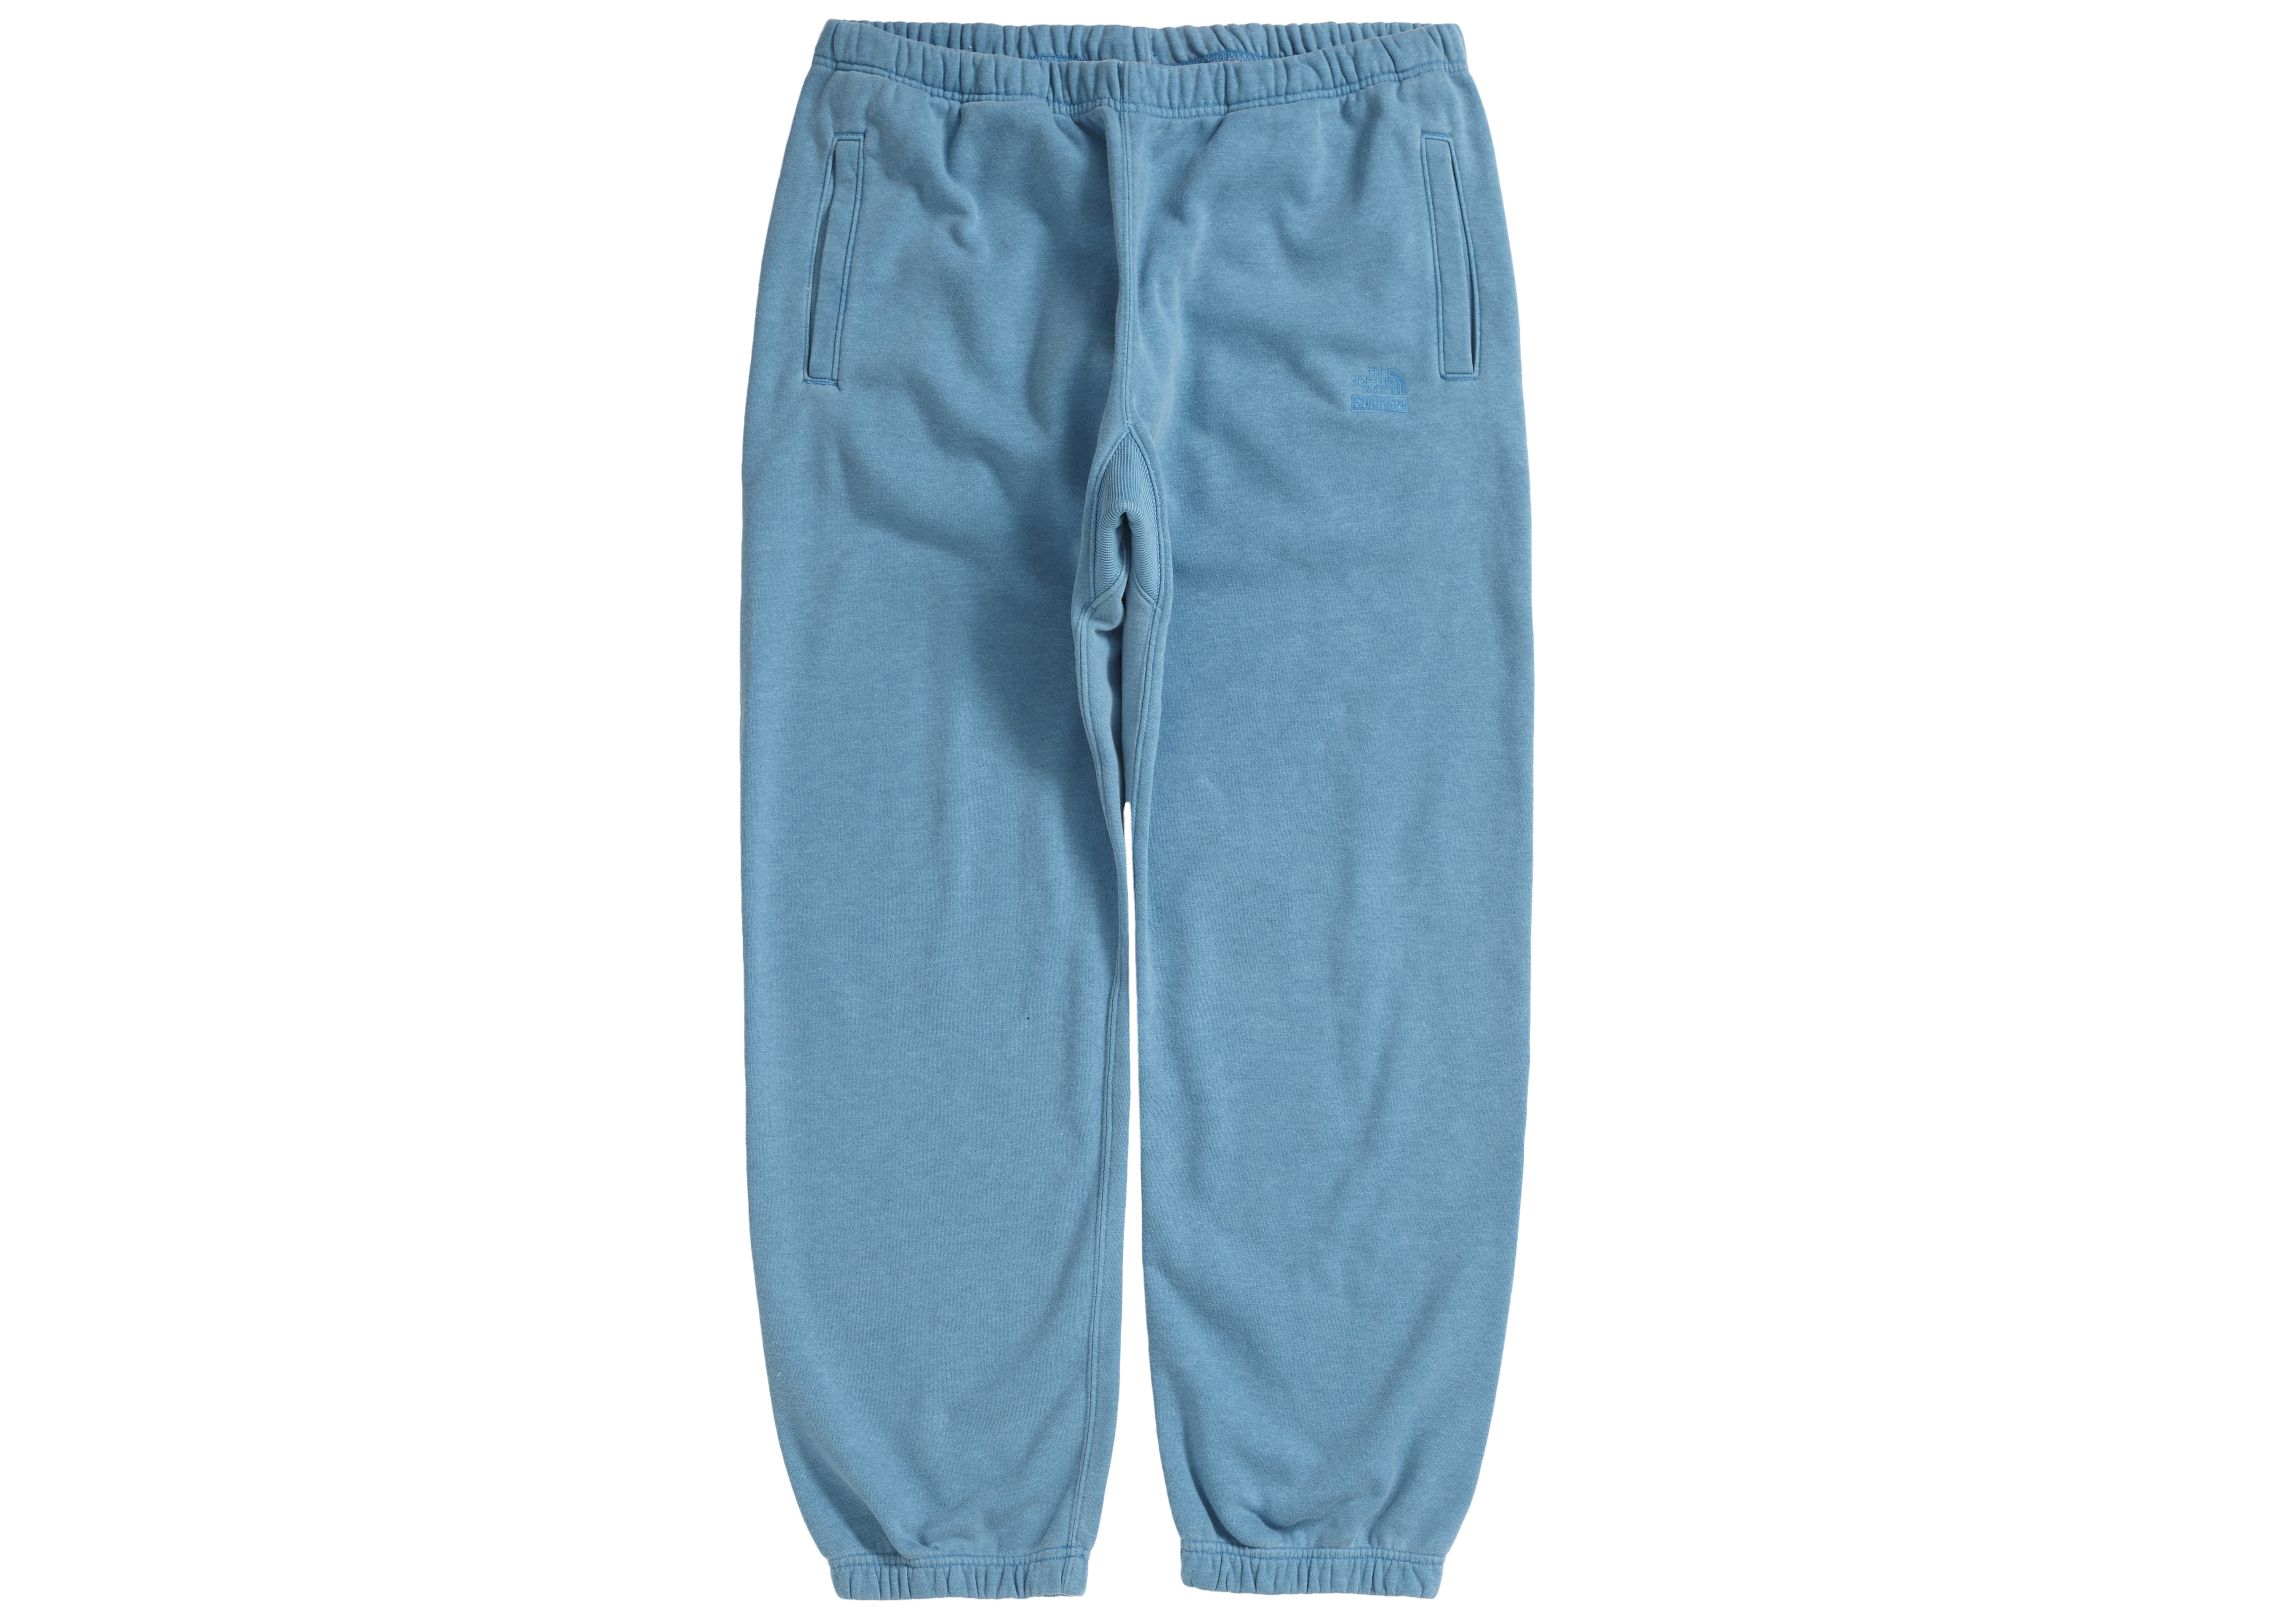 Supreme The North Face Pigment Printed Sweatpant Turquoise Men's